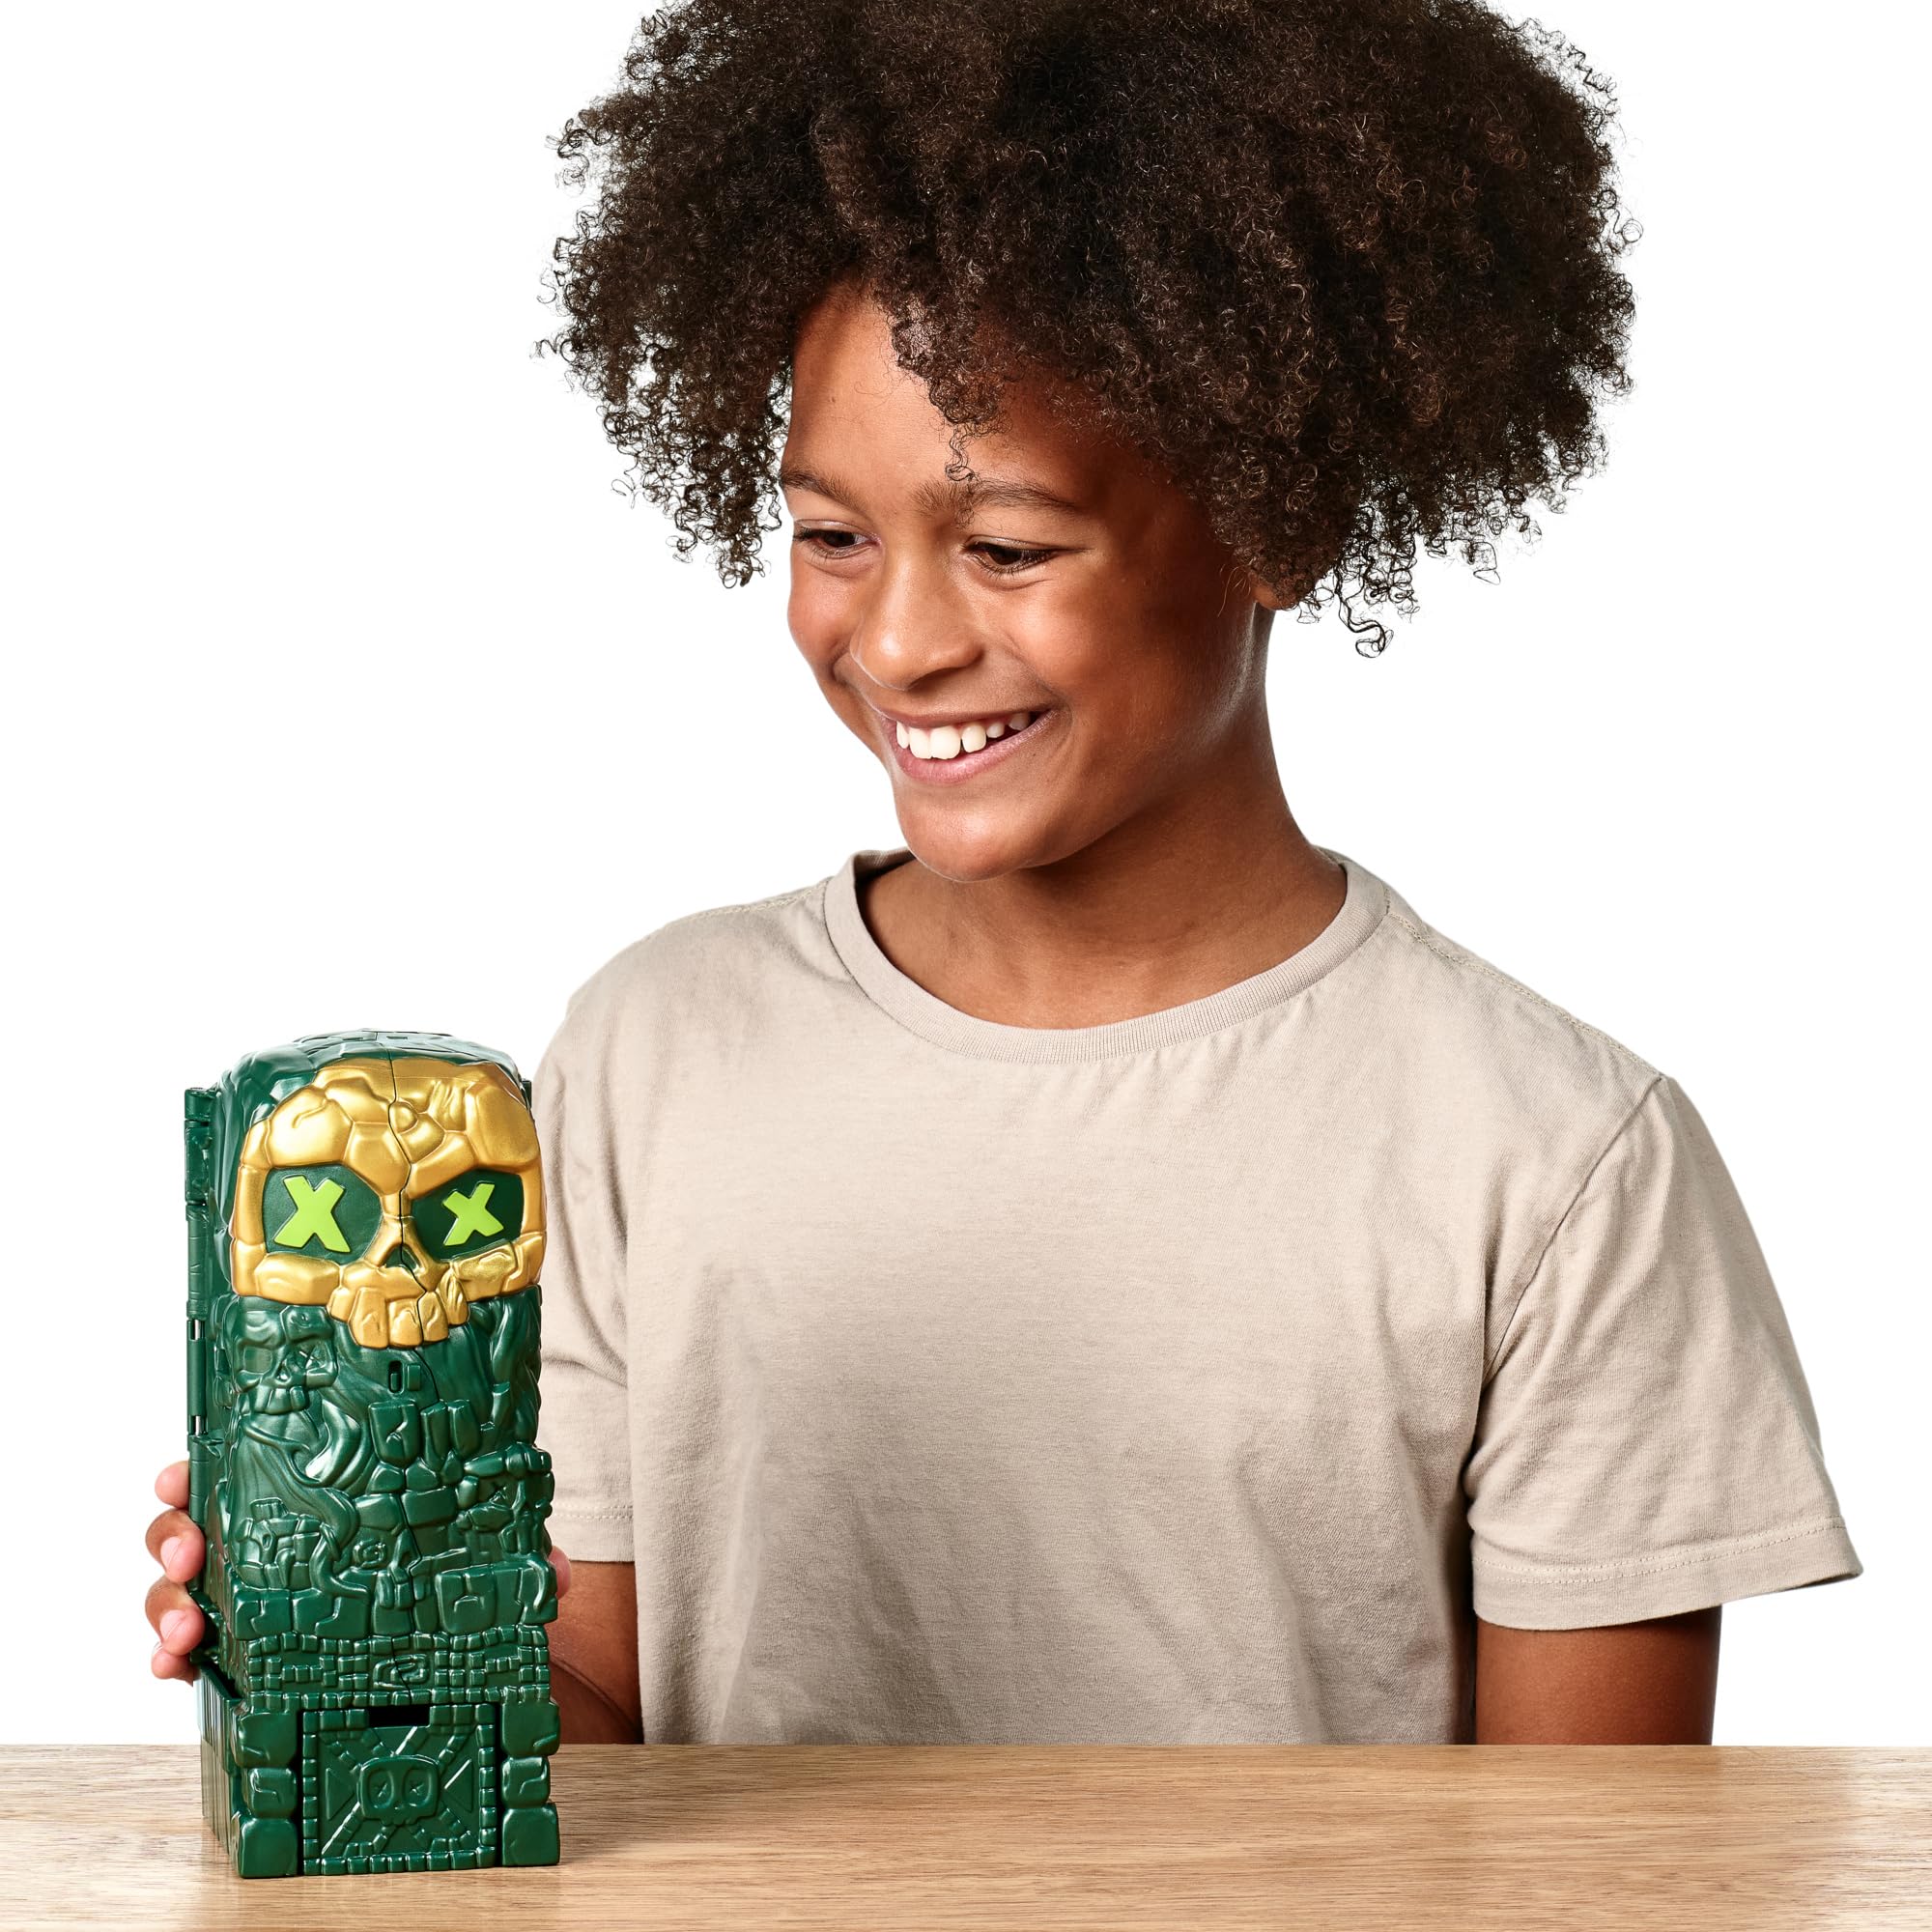 TREASURE X Lost Lands Skull Island Swamp Tower Micro Playset, 15 Levels of Adventure. Survive The Traps and Discover 2 Micro Sized Action Figures. Will You Find Real Gold Dipped Treasure?